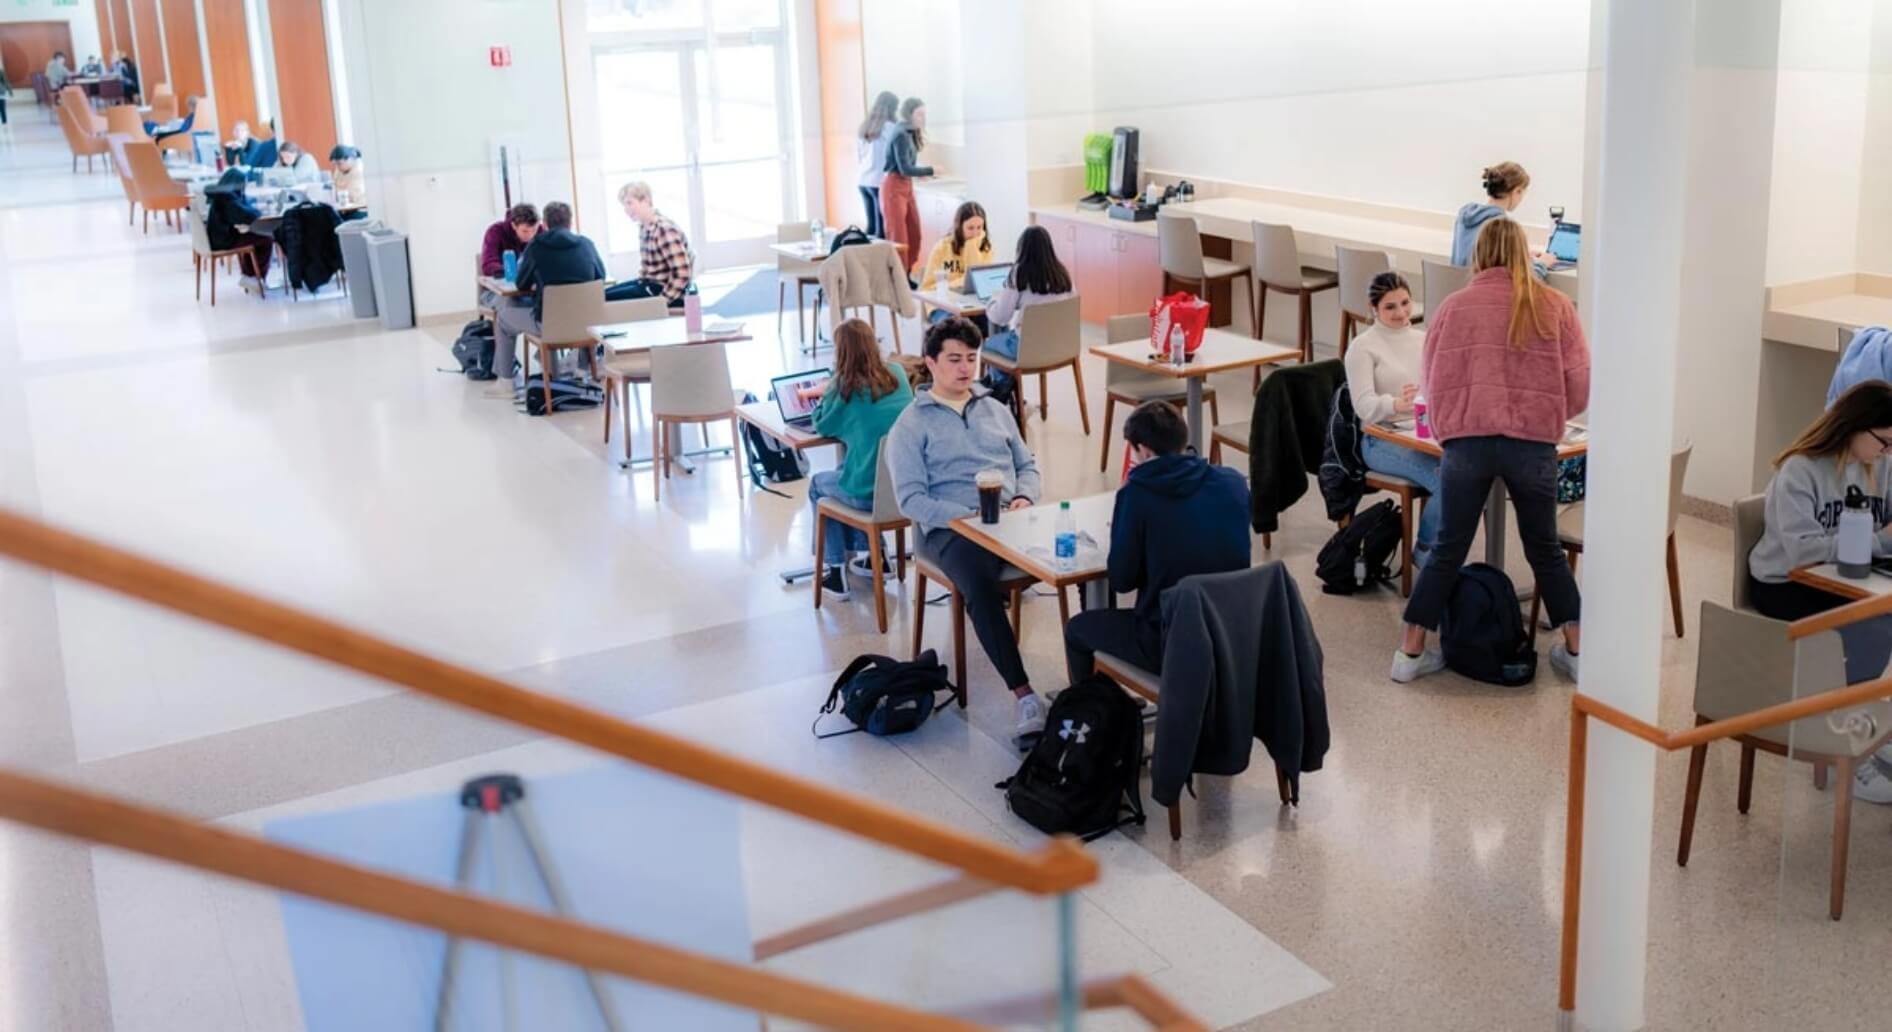 The new Tully Family Cafe & Commons at 245 Beacon Street not only offers nourishment but also a place for members of the BC community to connect and share ideas.